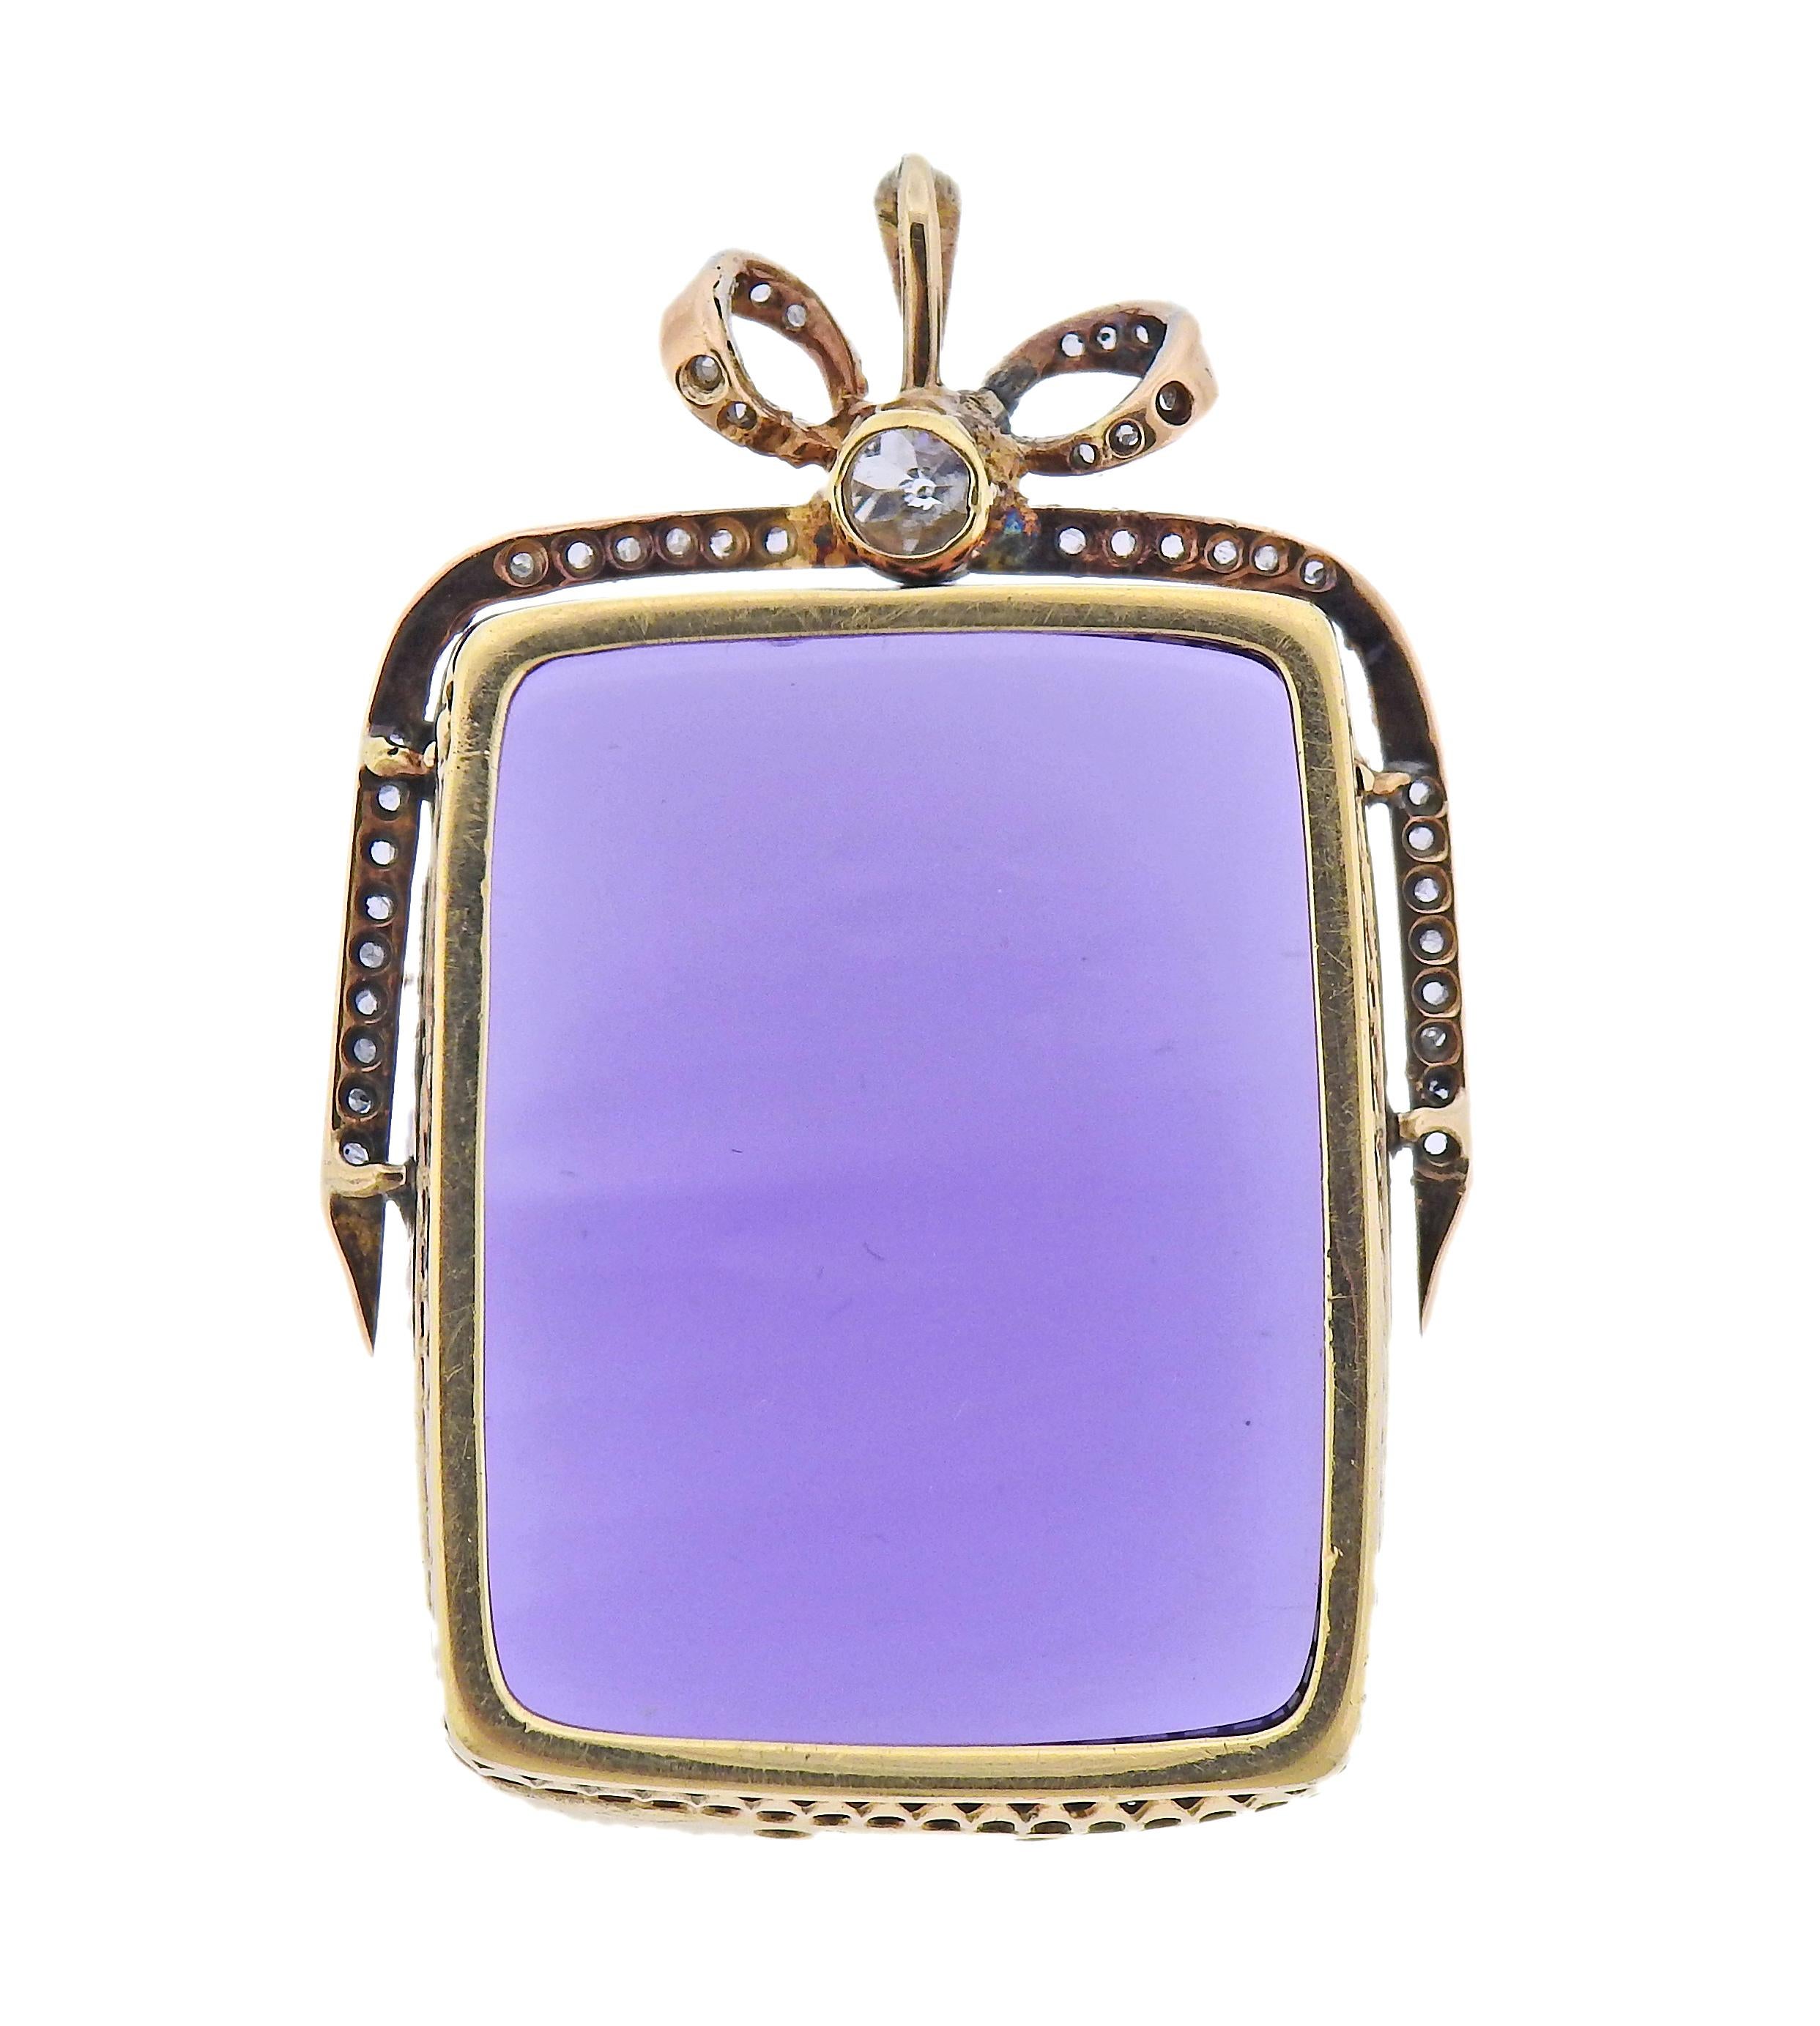 Antique 14k gold pendant, set with 30mm x 24mm x 9.3mm amethyst, surrounding small rose cut diamonds (one is missing) , center largest old mine cut diamond - approx. 0.30ct. Pendant is 44mm x 30mm. Weight - 20.2 grams. 